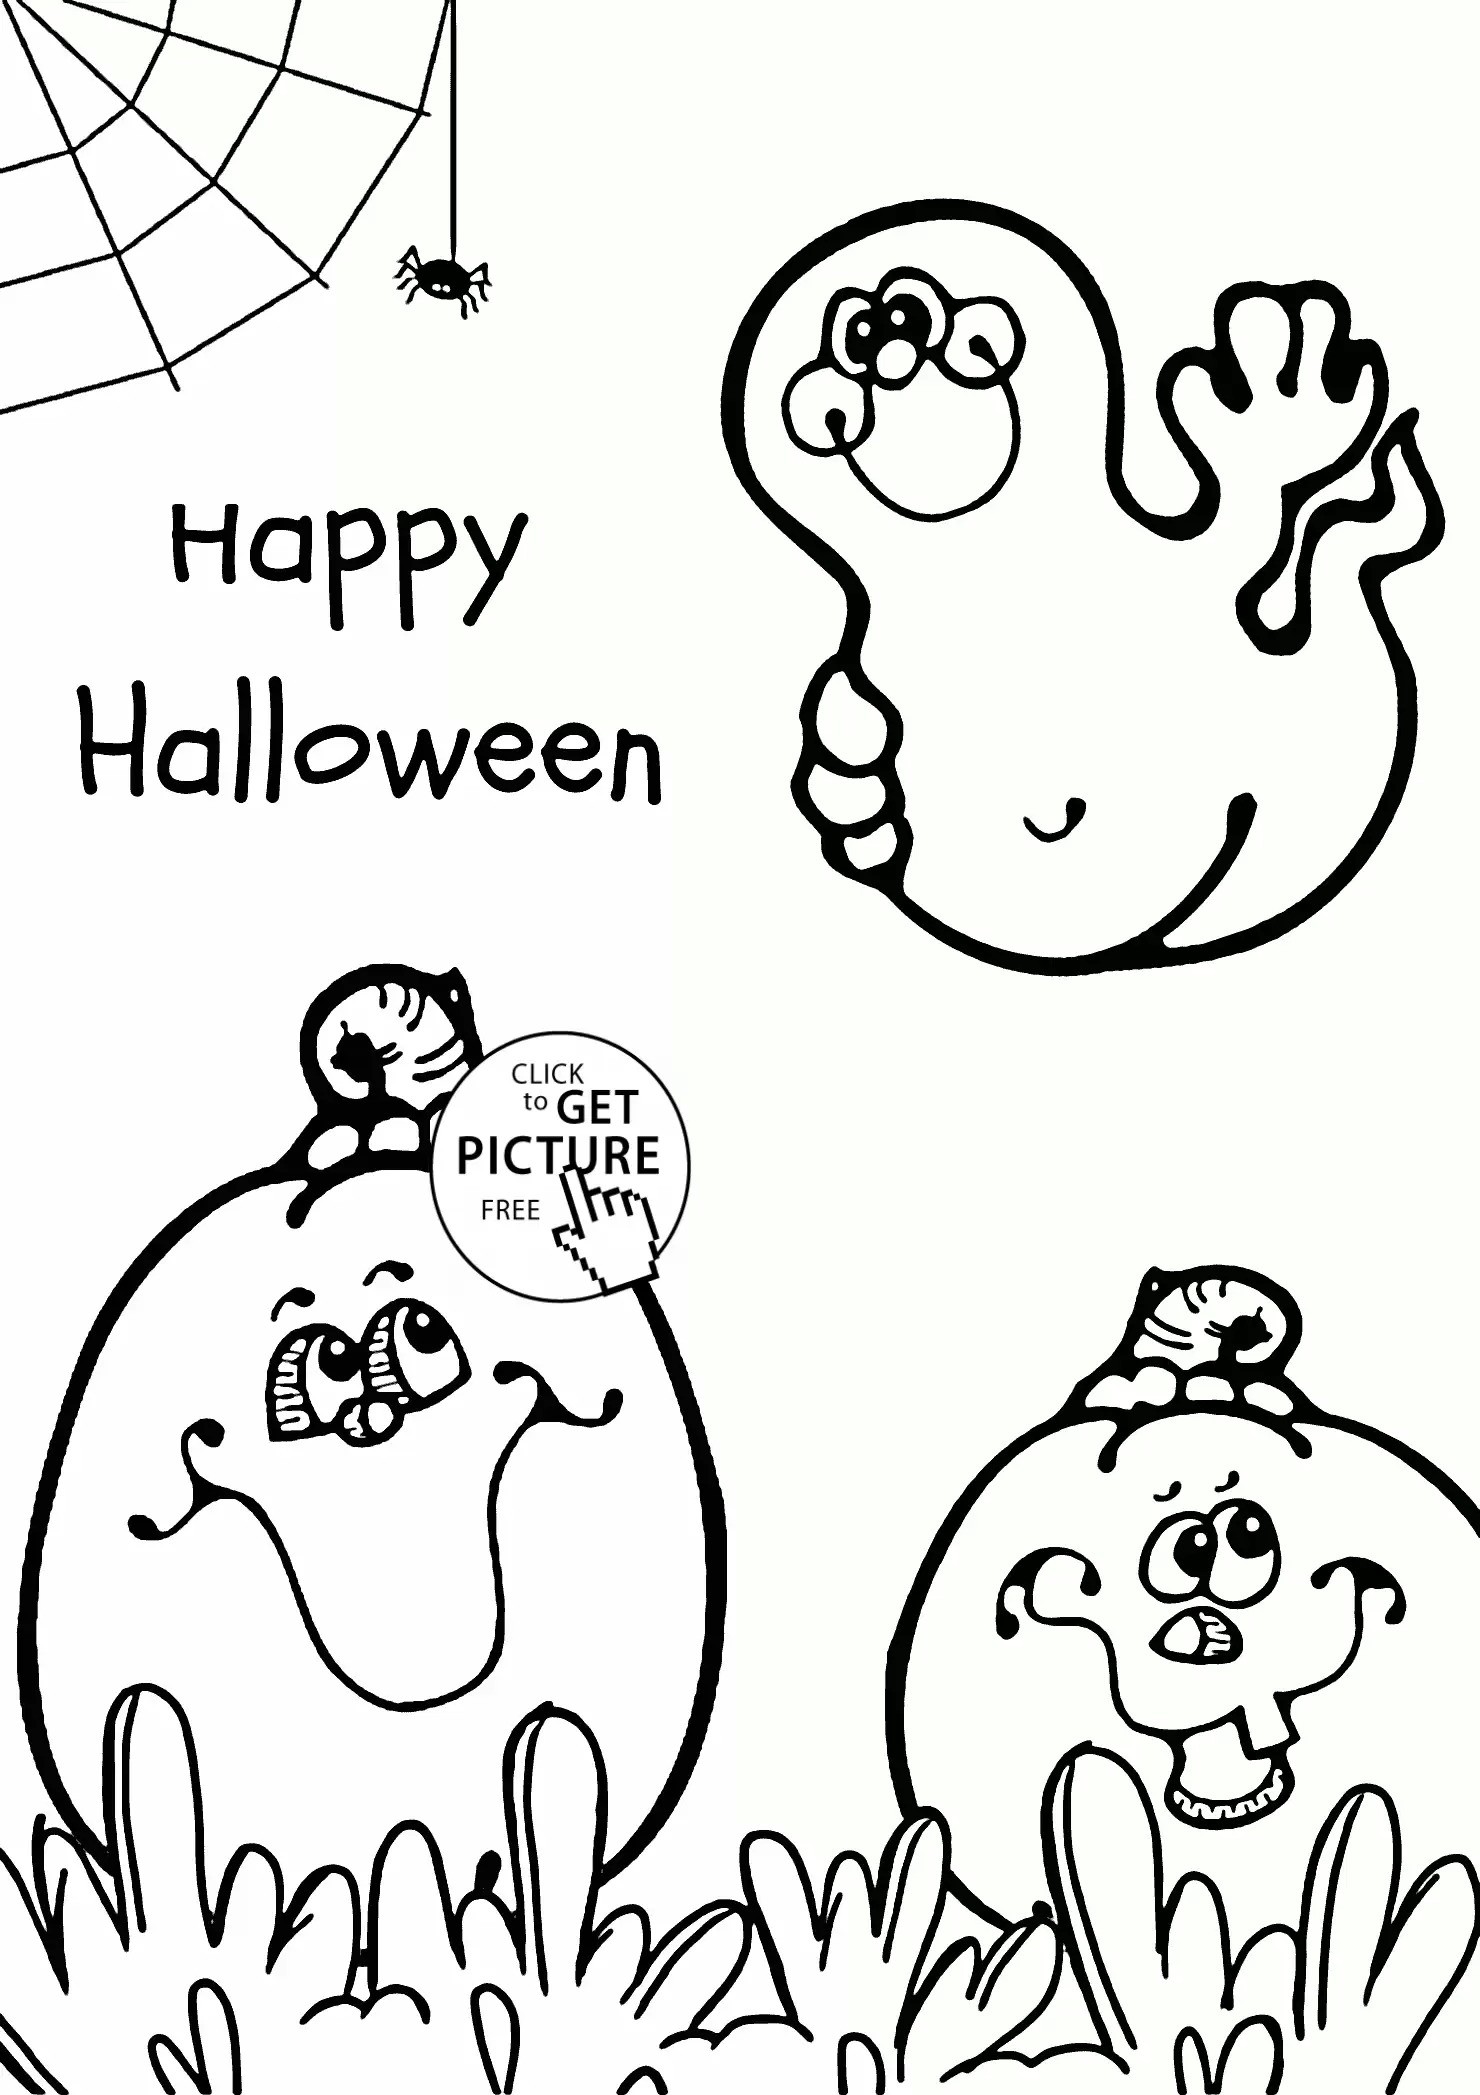 Happy Halloween Pumpkin Coloring Pages at GetColorings.com | Free